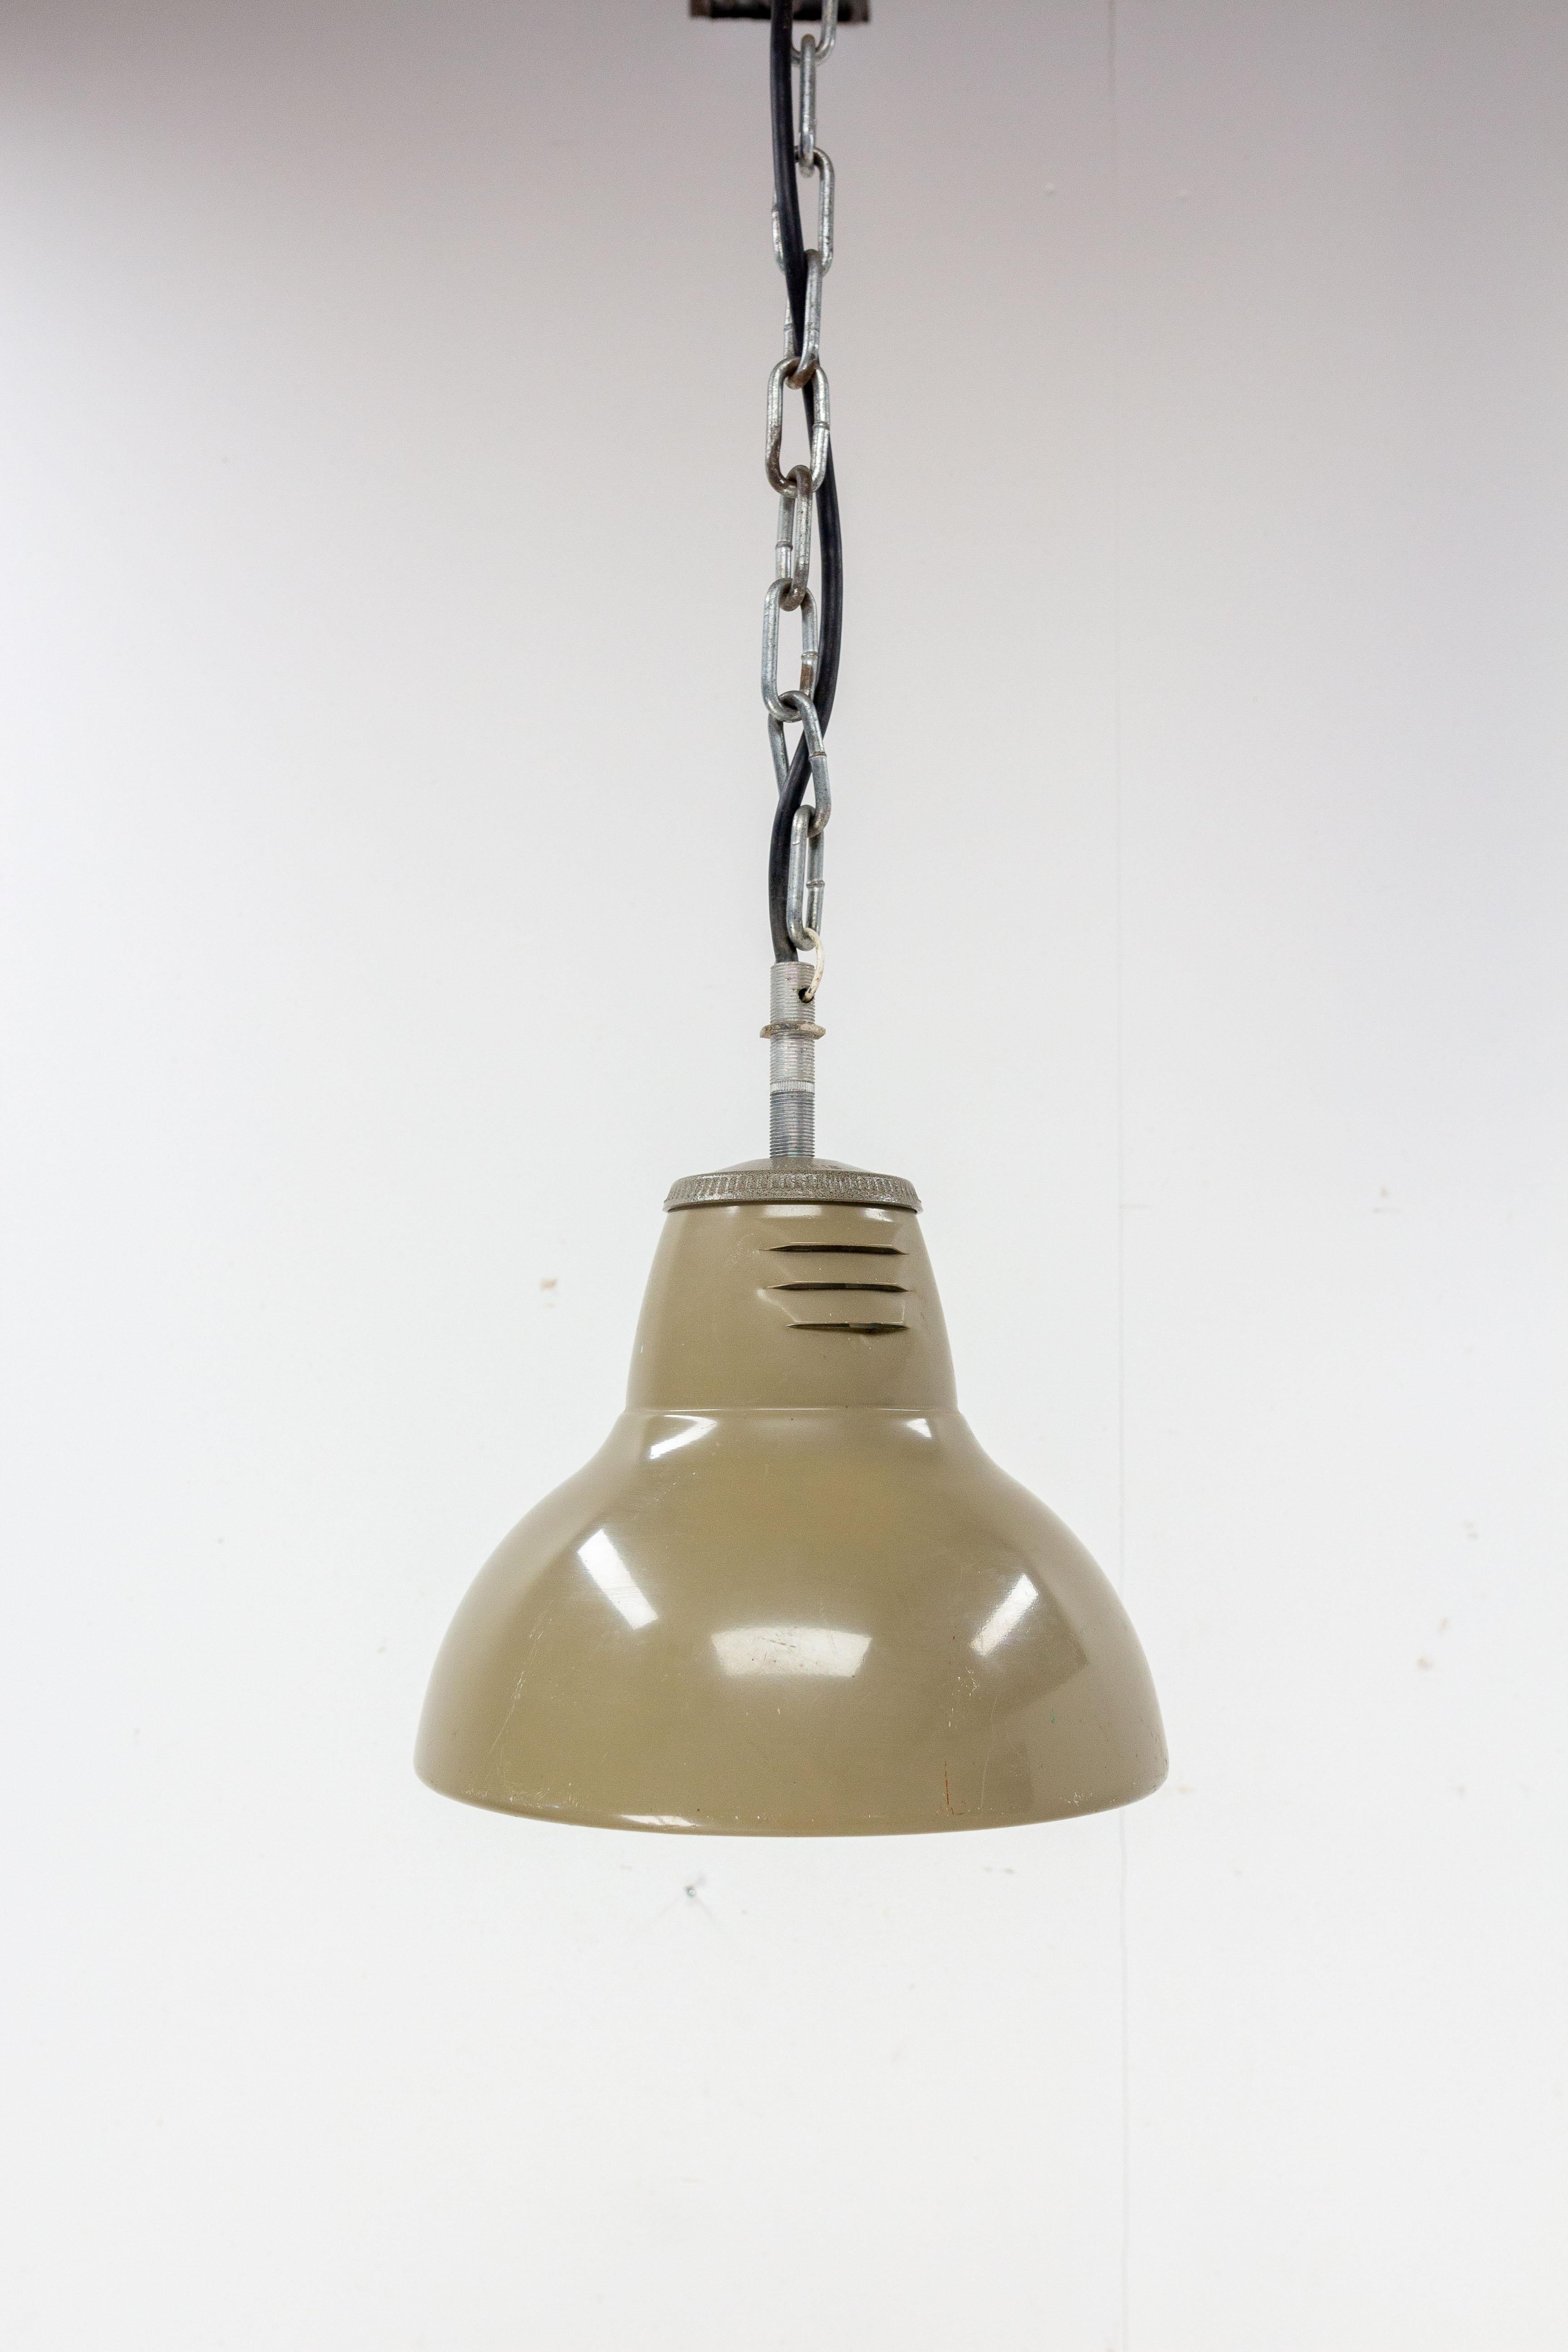 Pendant light chandelier, France, mid-century
Industriel style with glass inside (holophane style) for more efficient lighting.
Suspension accessory: chain
This can be rewired to USA, UK and European standards
Good condition

Shipping:
D26 H24 2,4